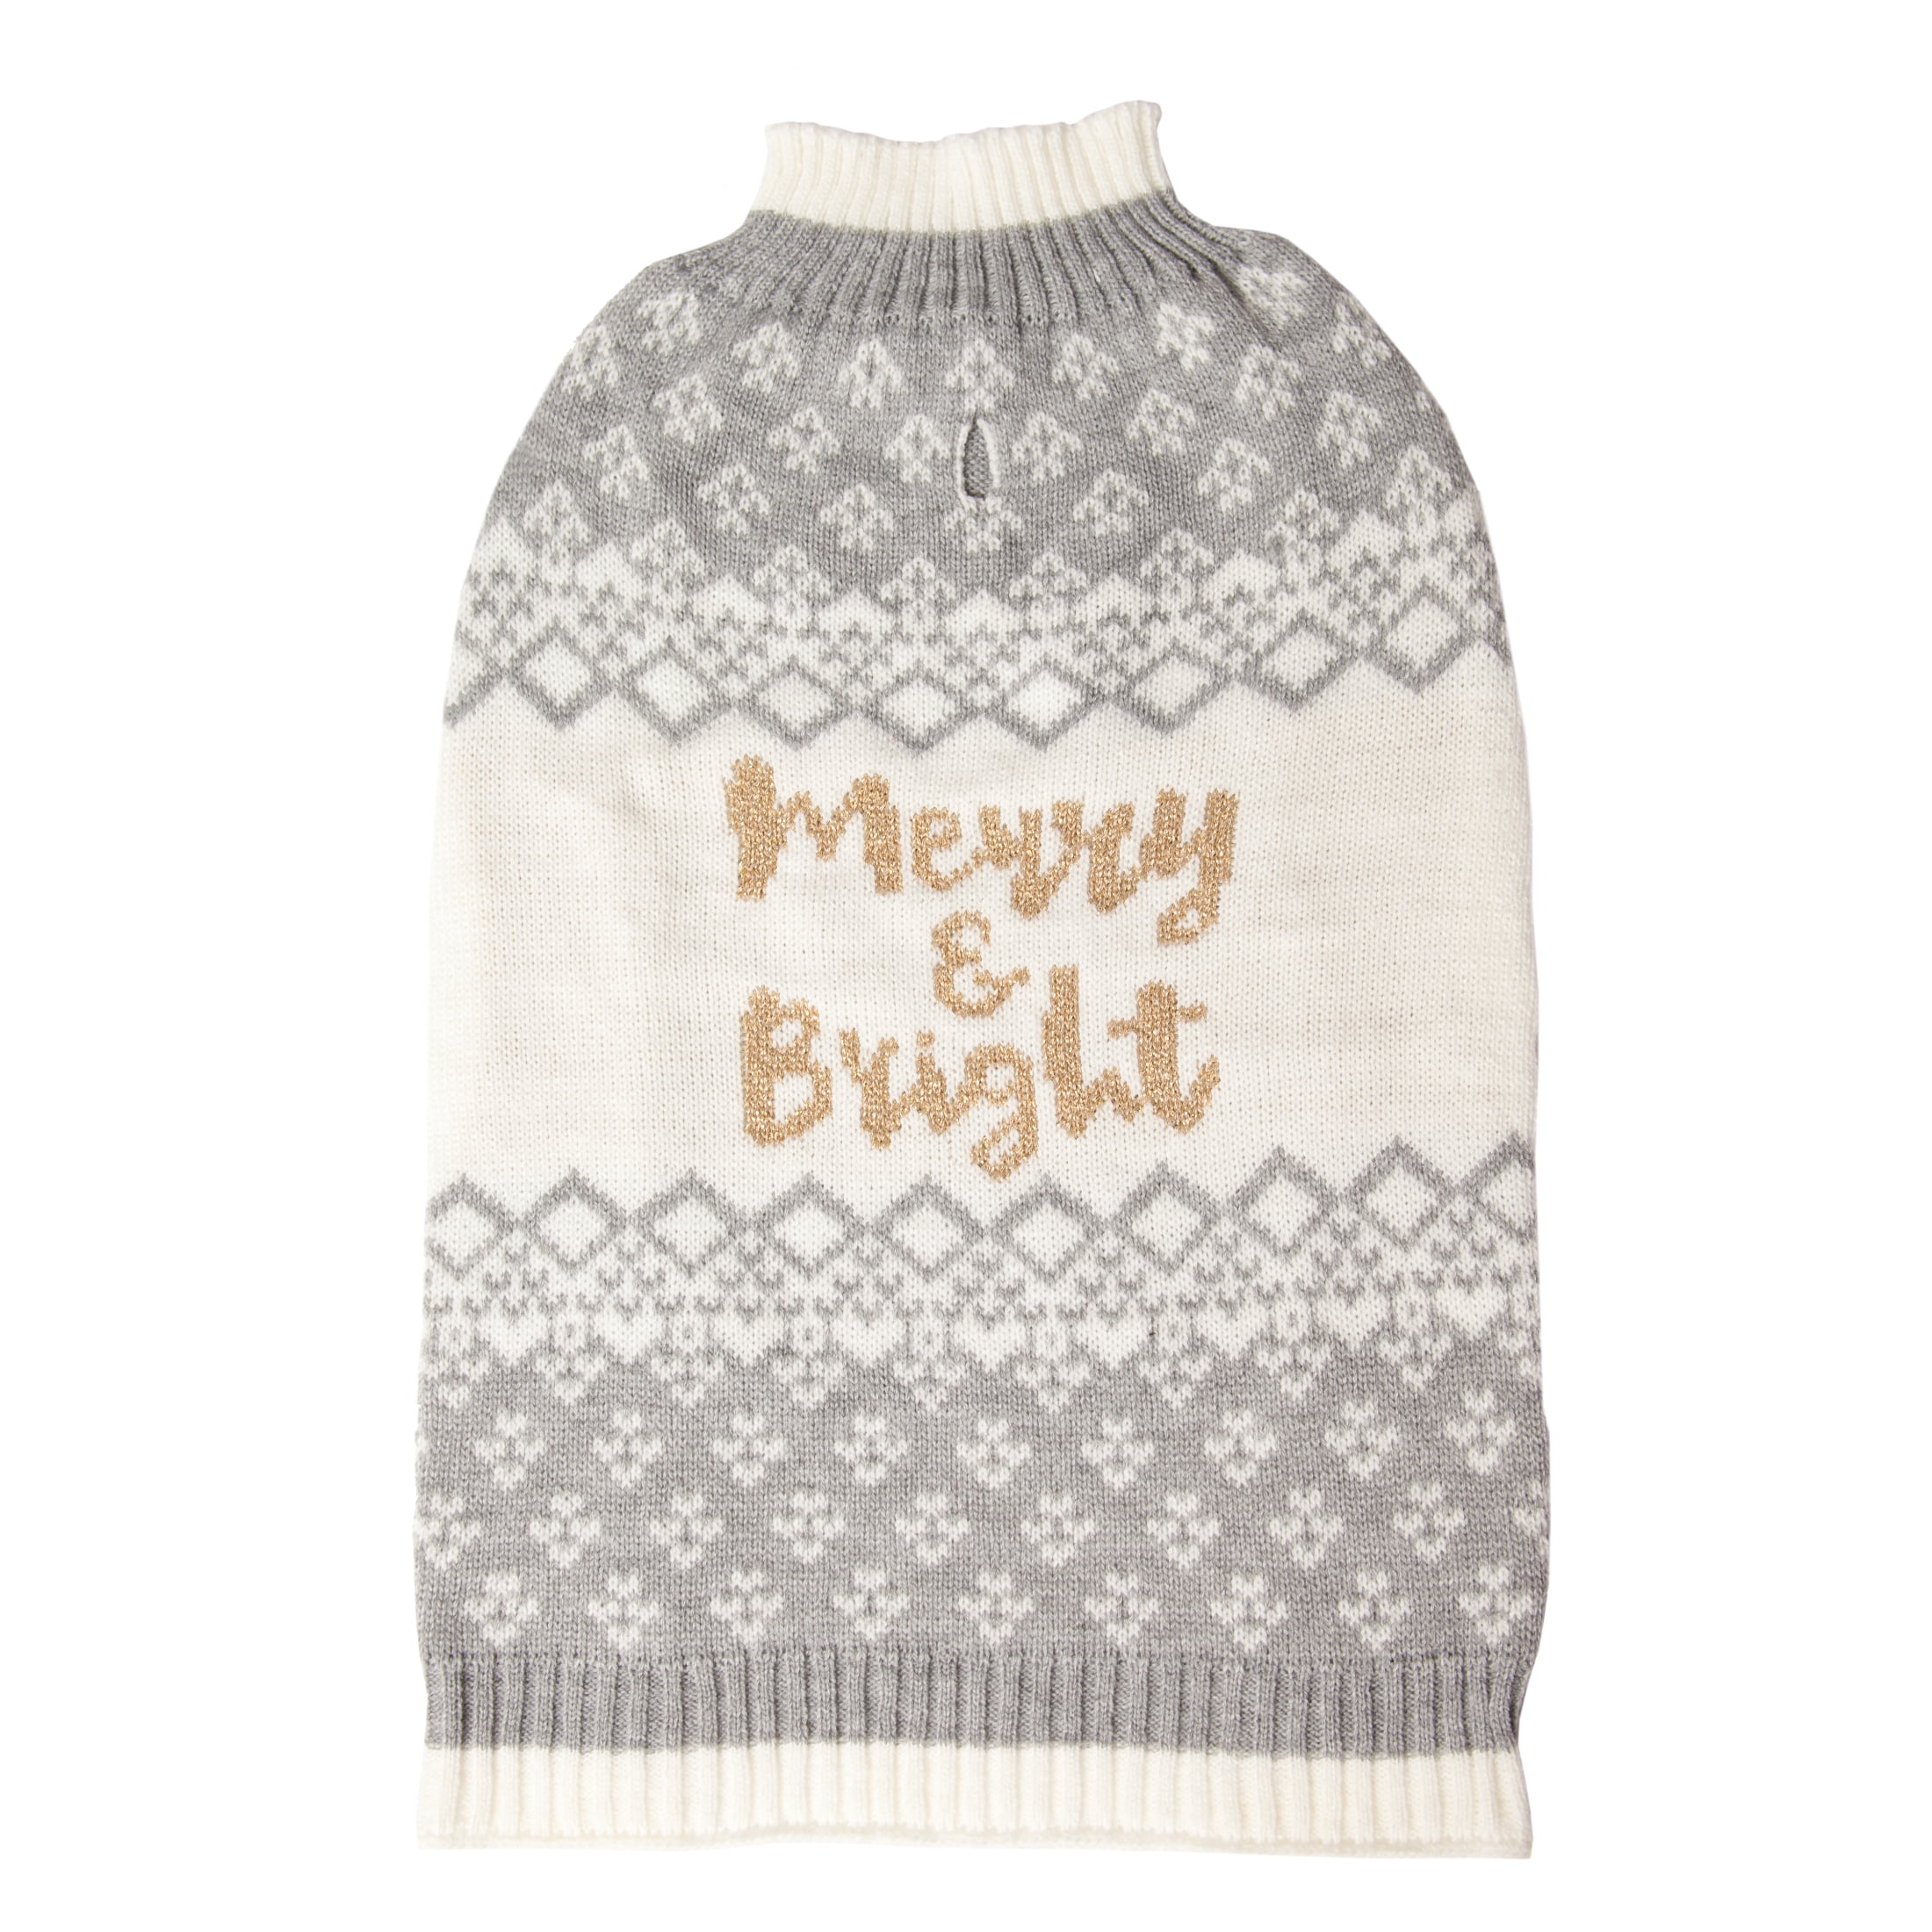 Vibrant Life Holiday Merry & Bright Fr Isle Dog Sweater and Cat Sweater